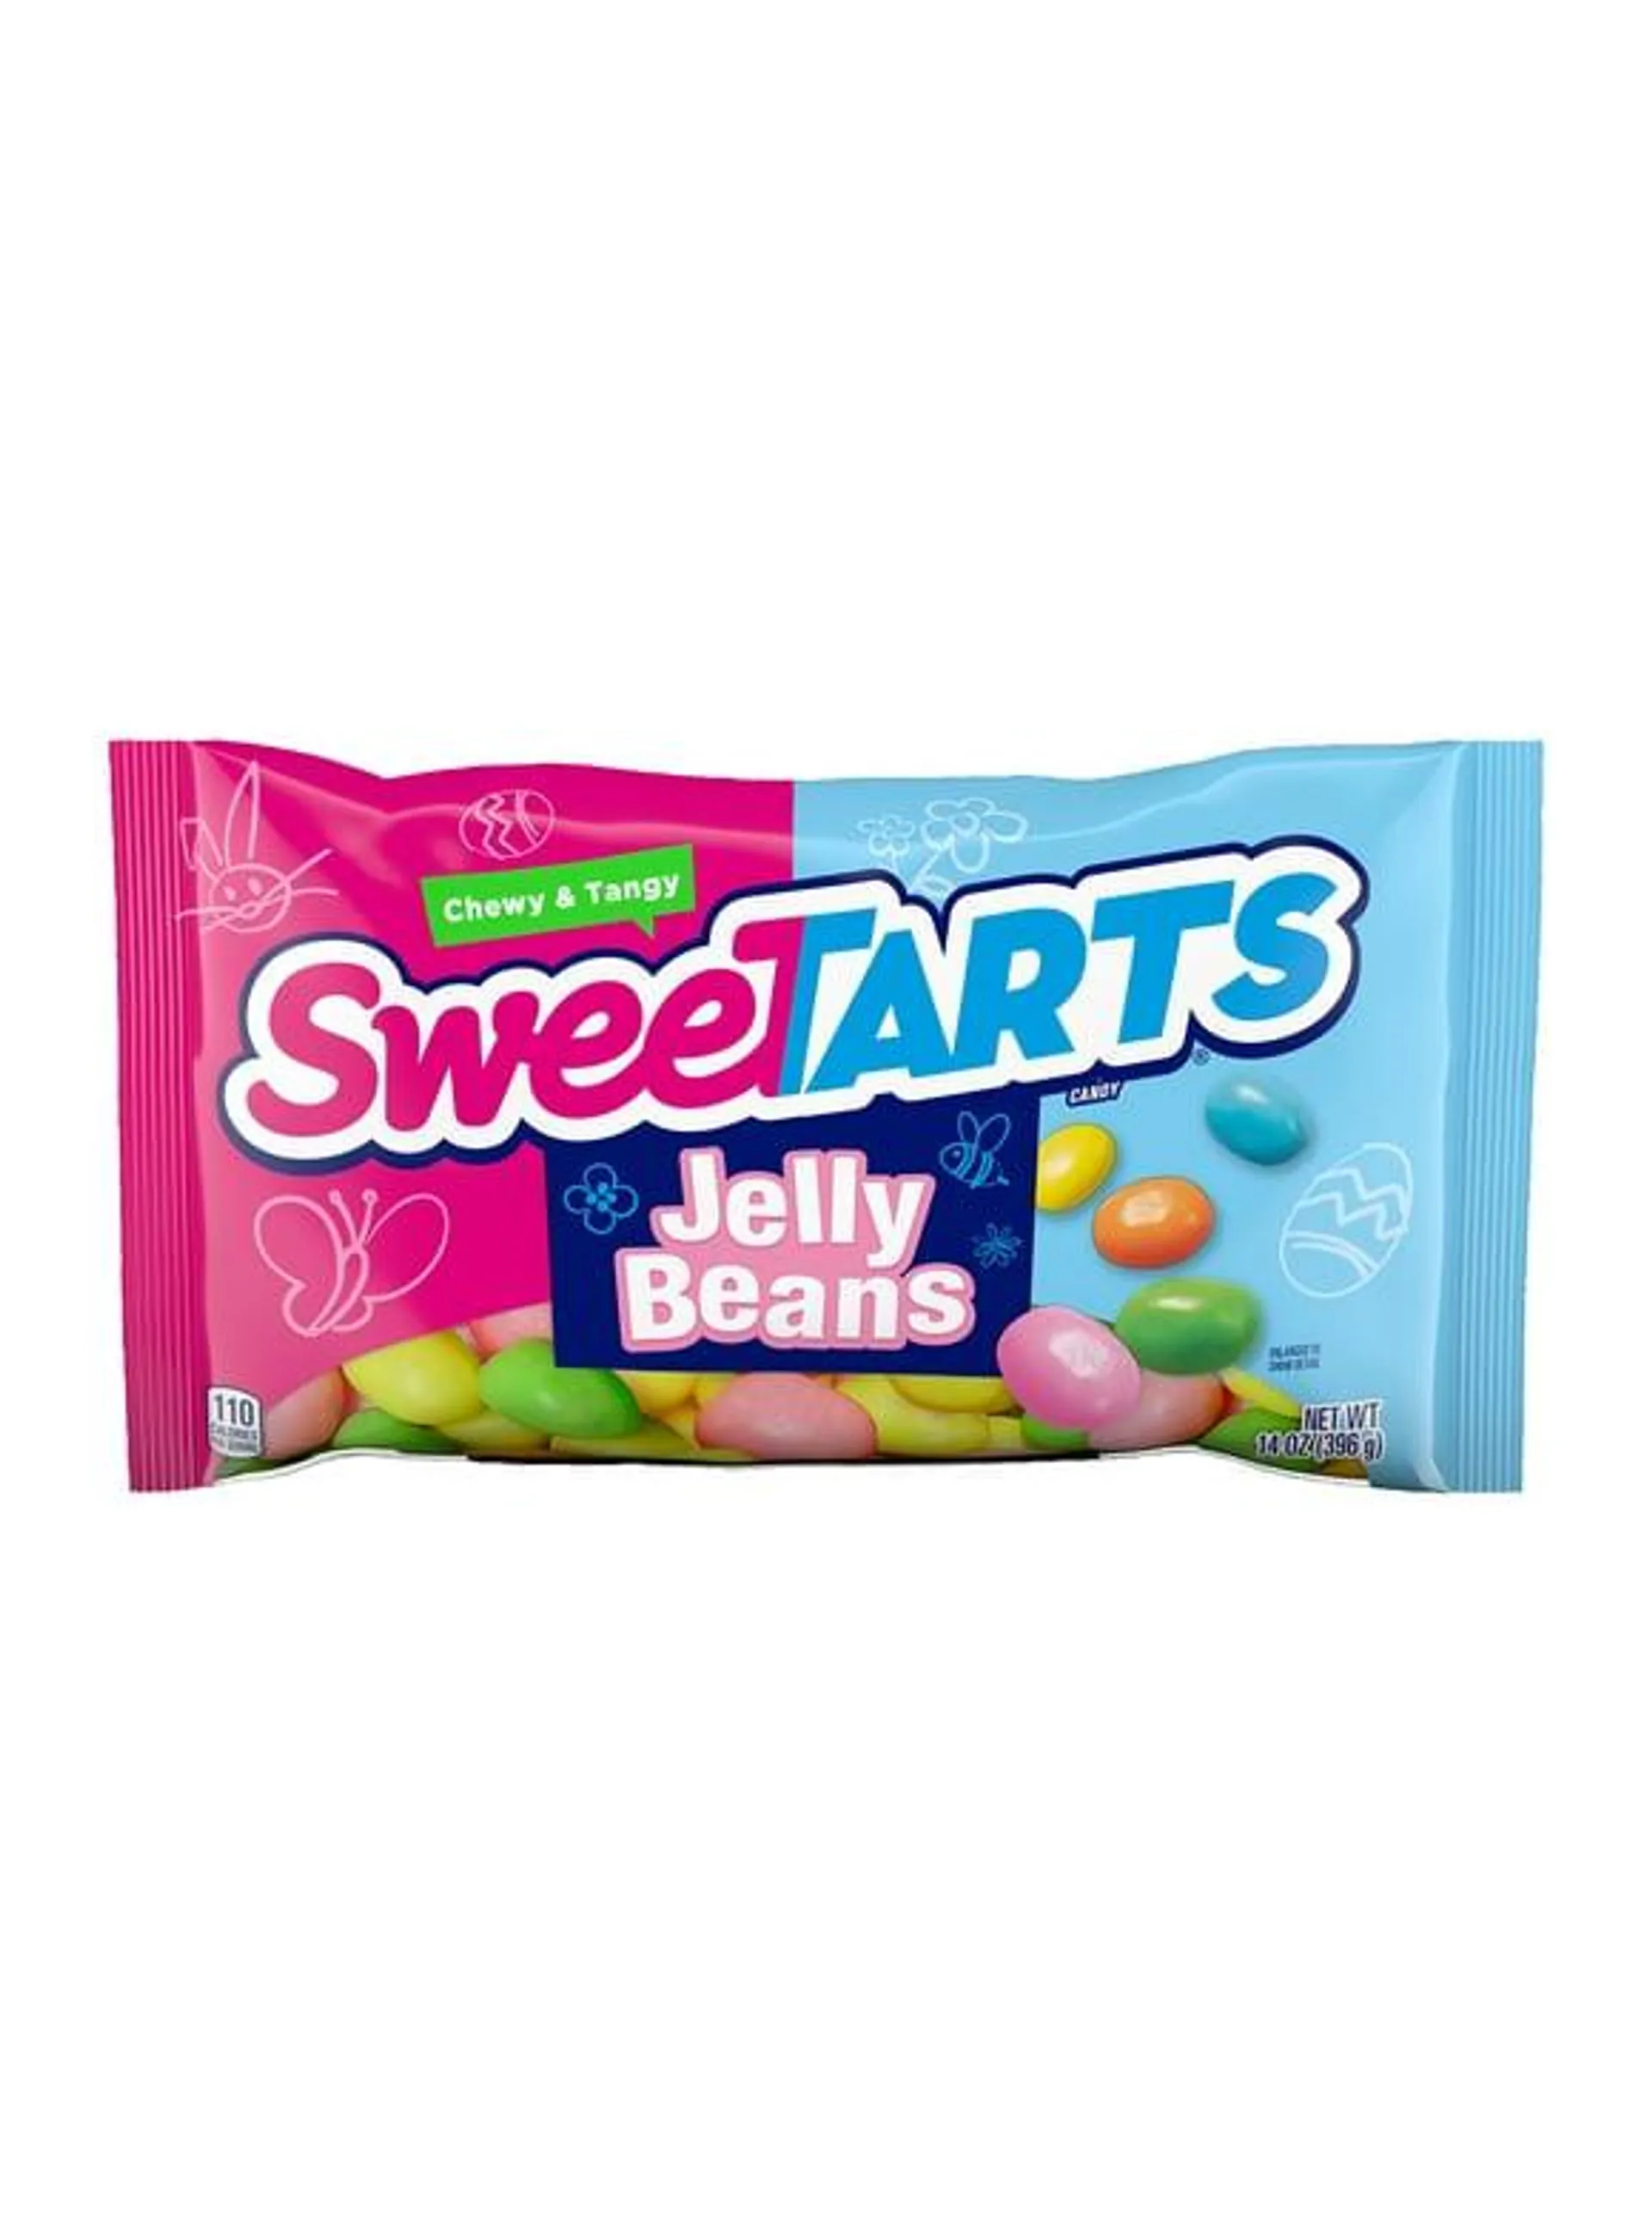 SweeTARTS Jelly Beans Easter Candy, 14oz